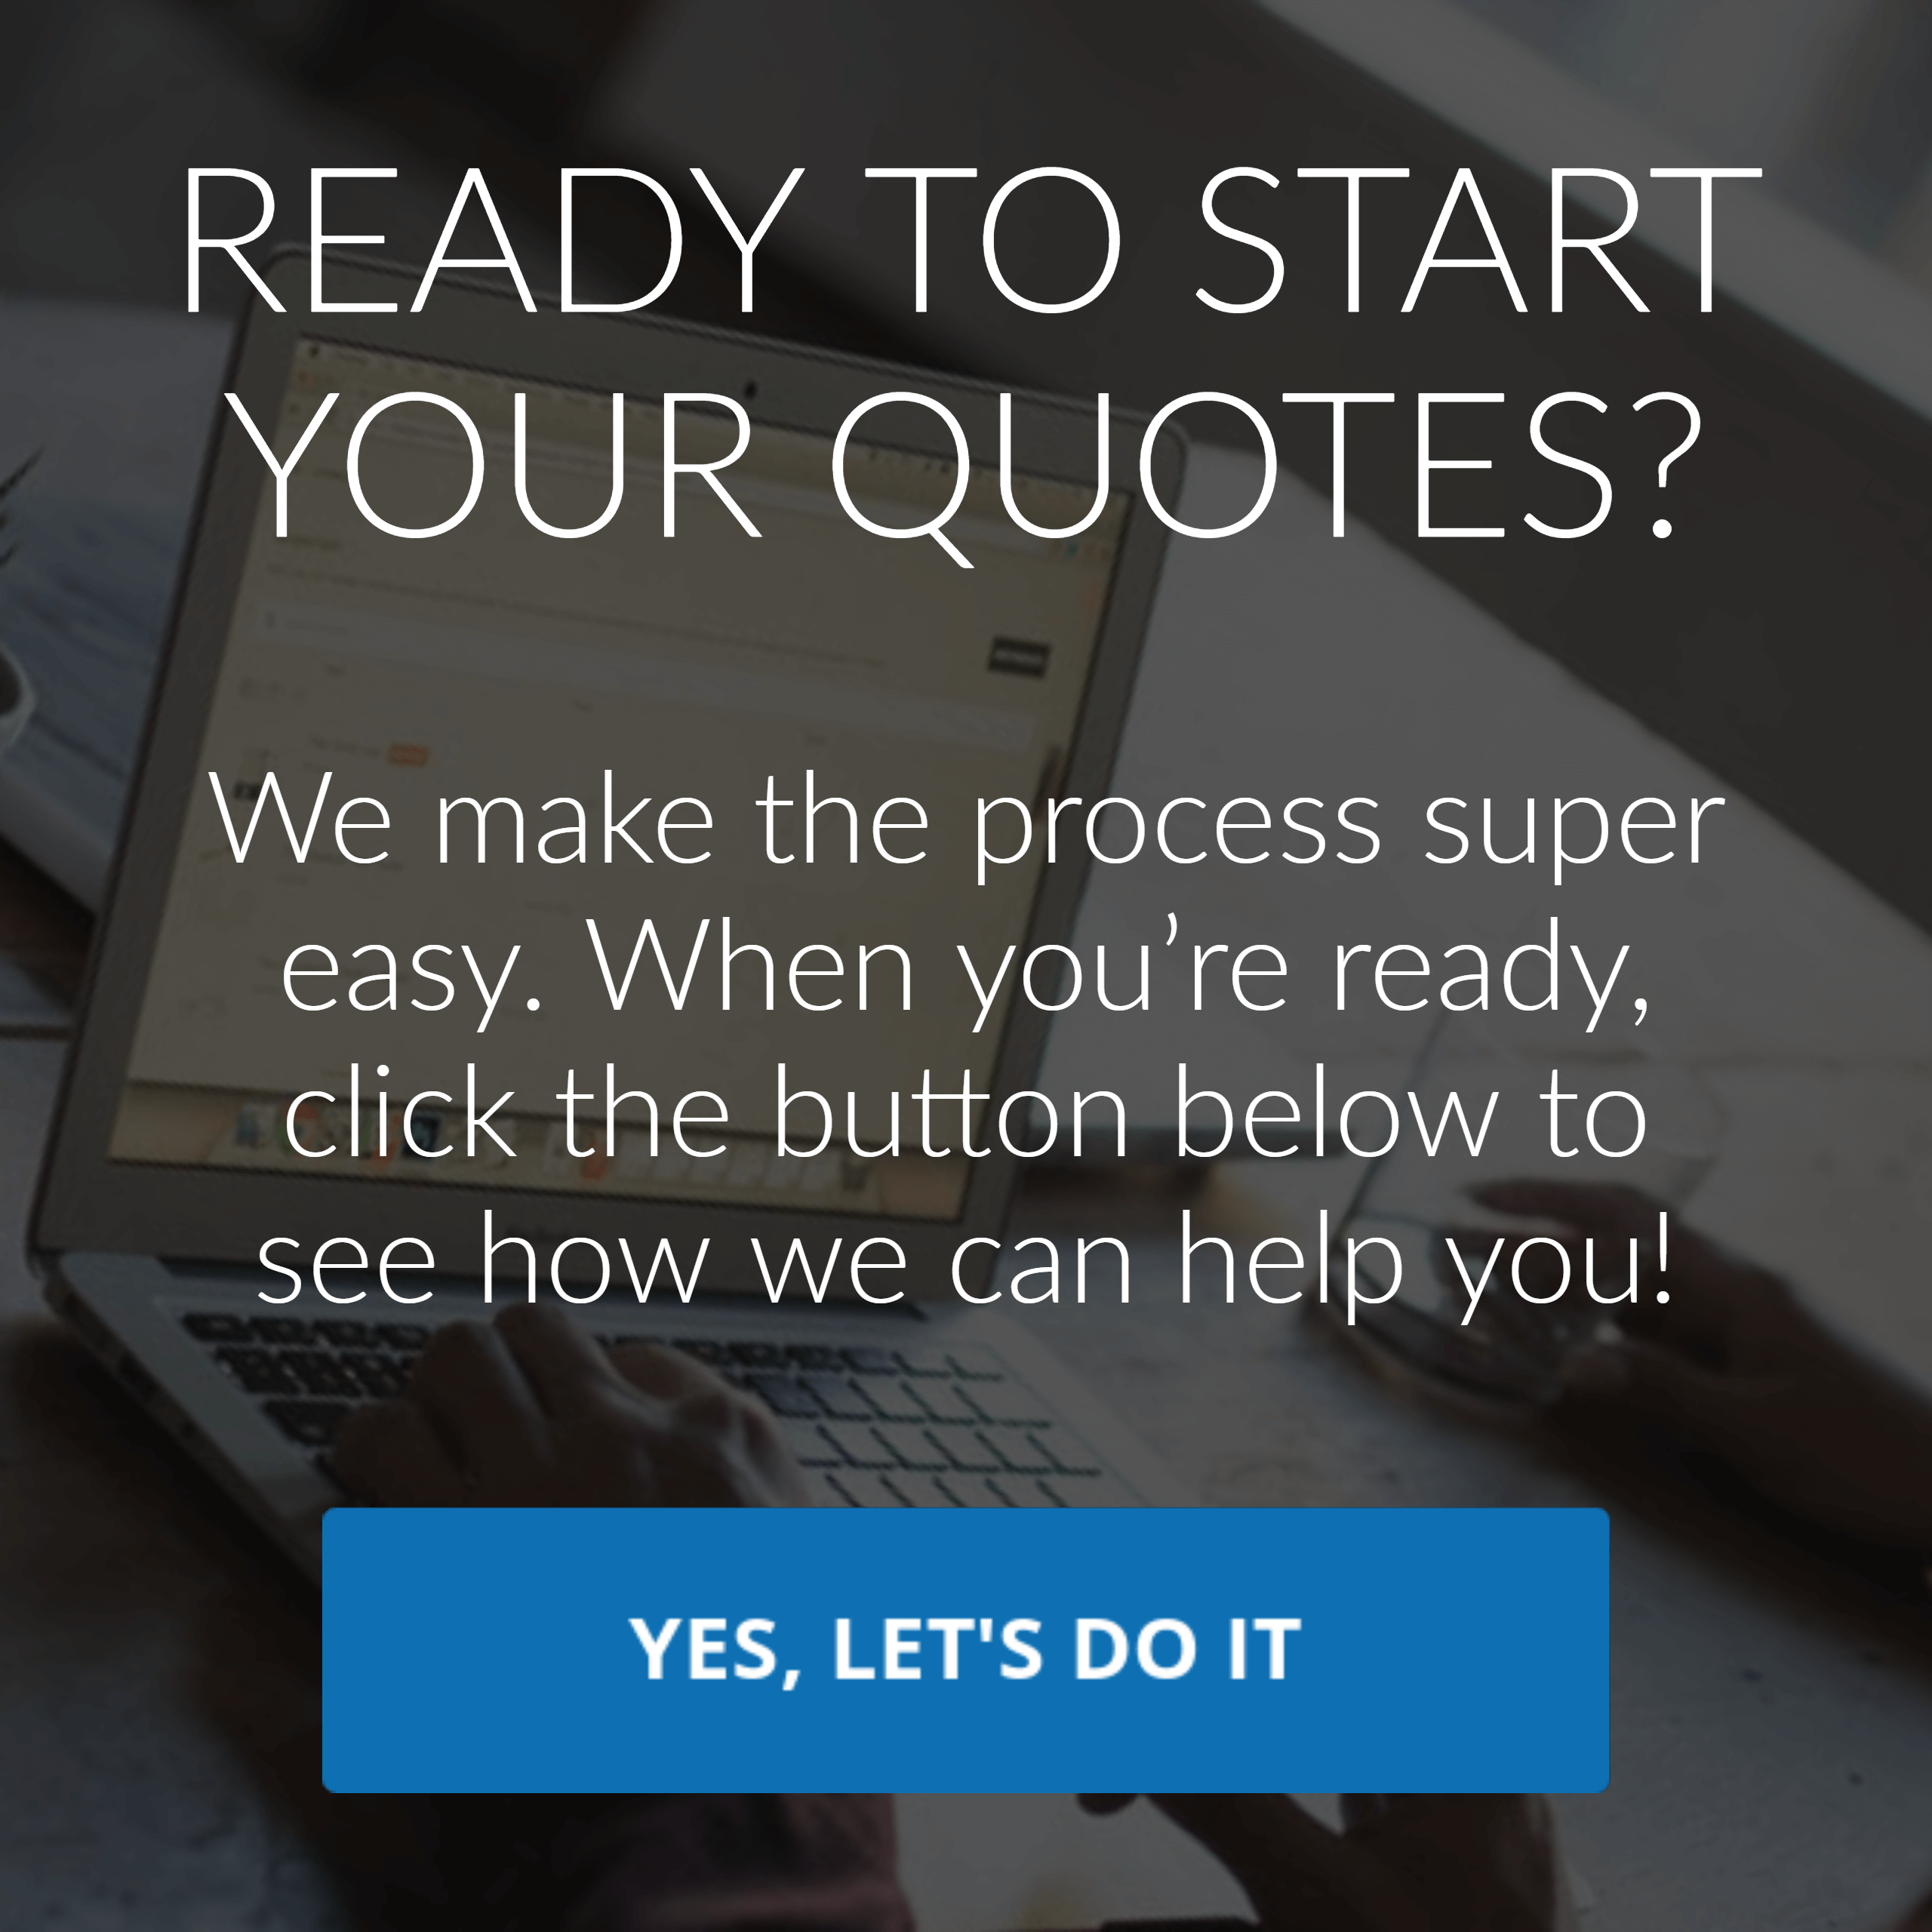 Ready to start your quotes?